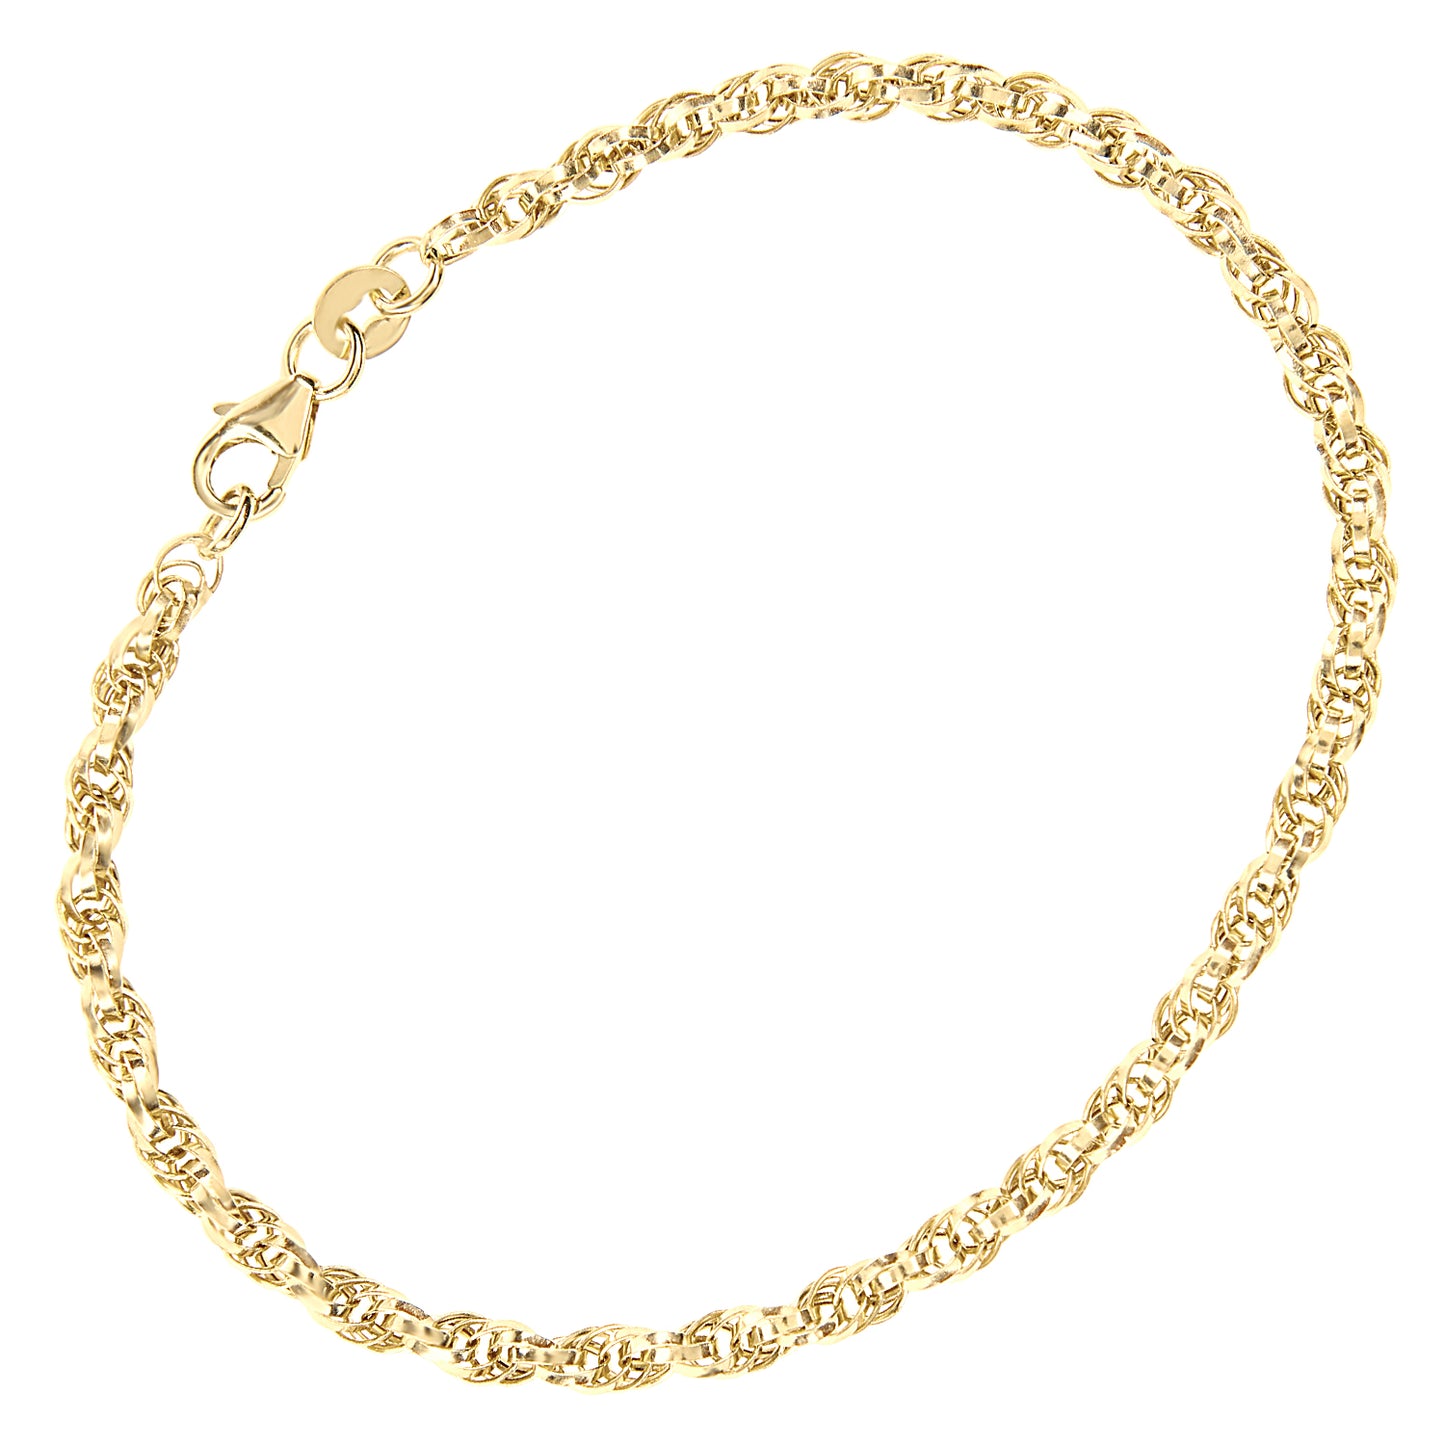 9ct Gold  Prince Of Wales Chain Bracelet 3mm 7.5 inch - BT1AXL802Y